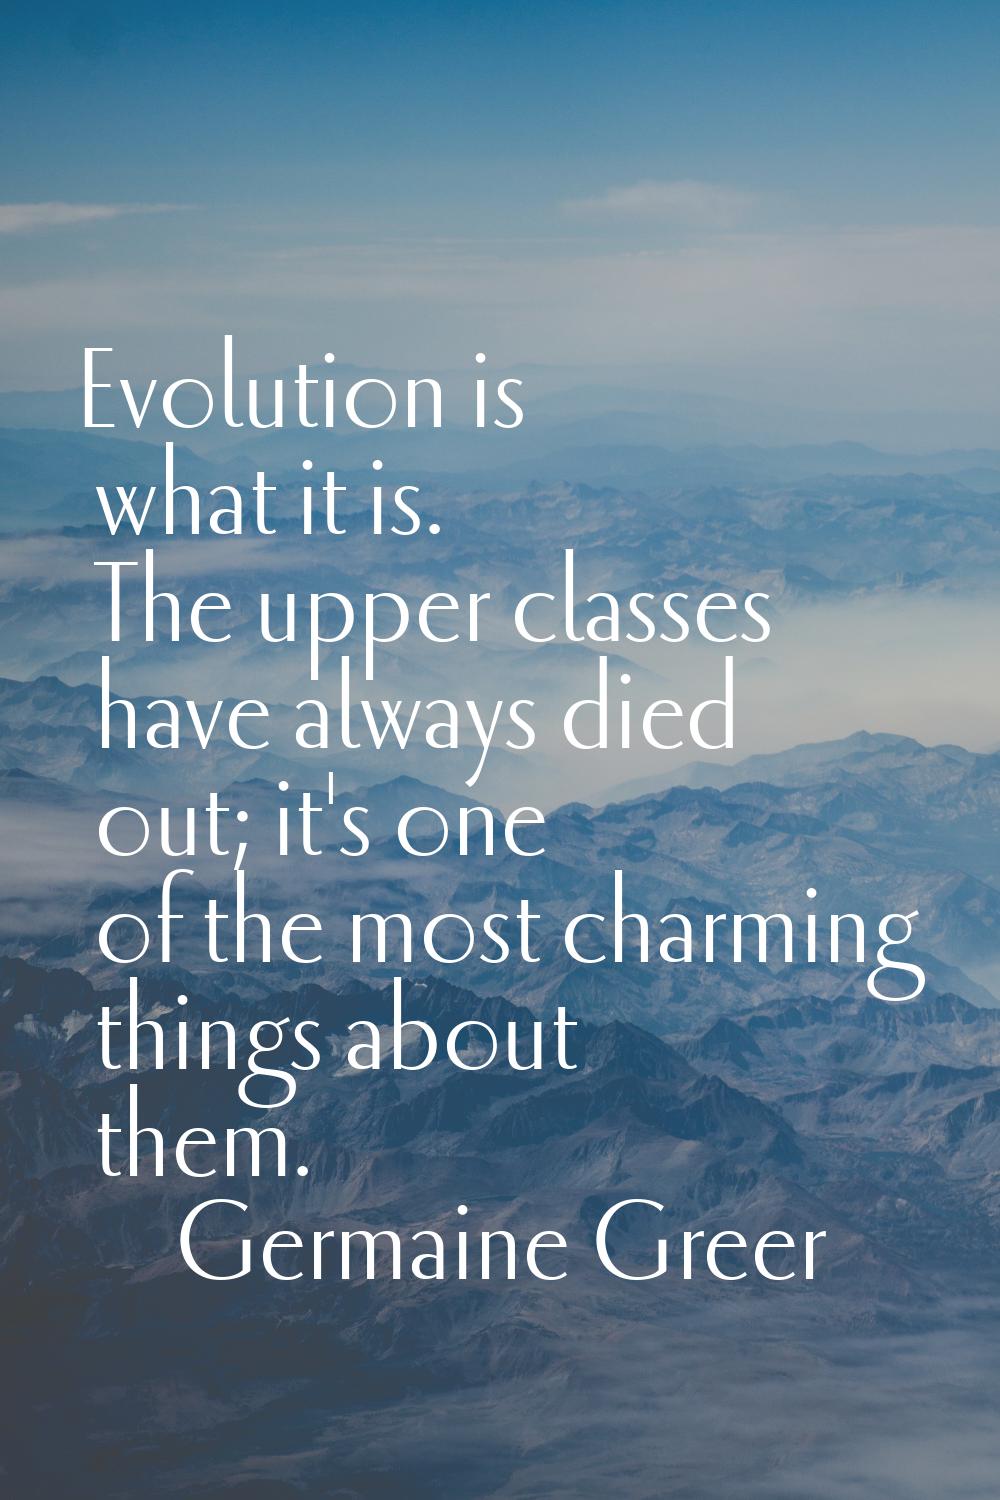 Evolution is what it is. The upper classes have always died out; it's one of the most charming thin